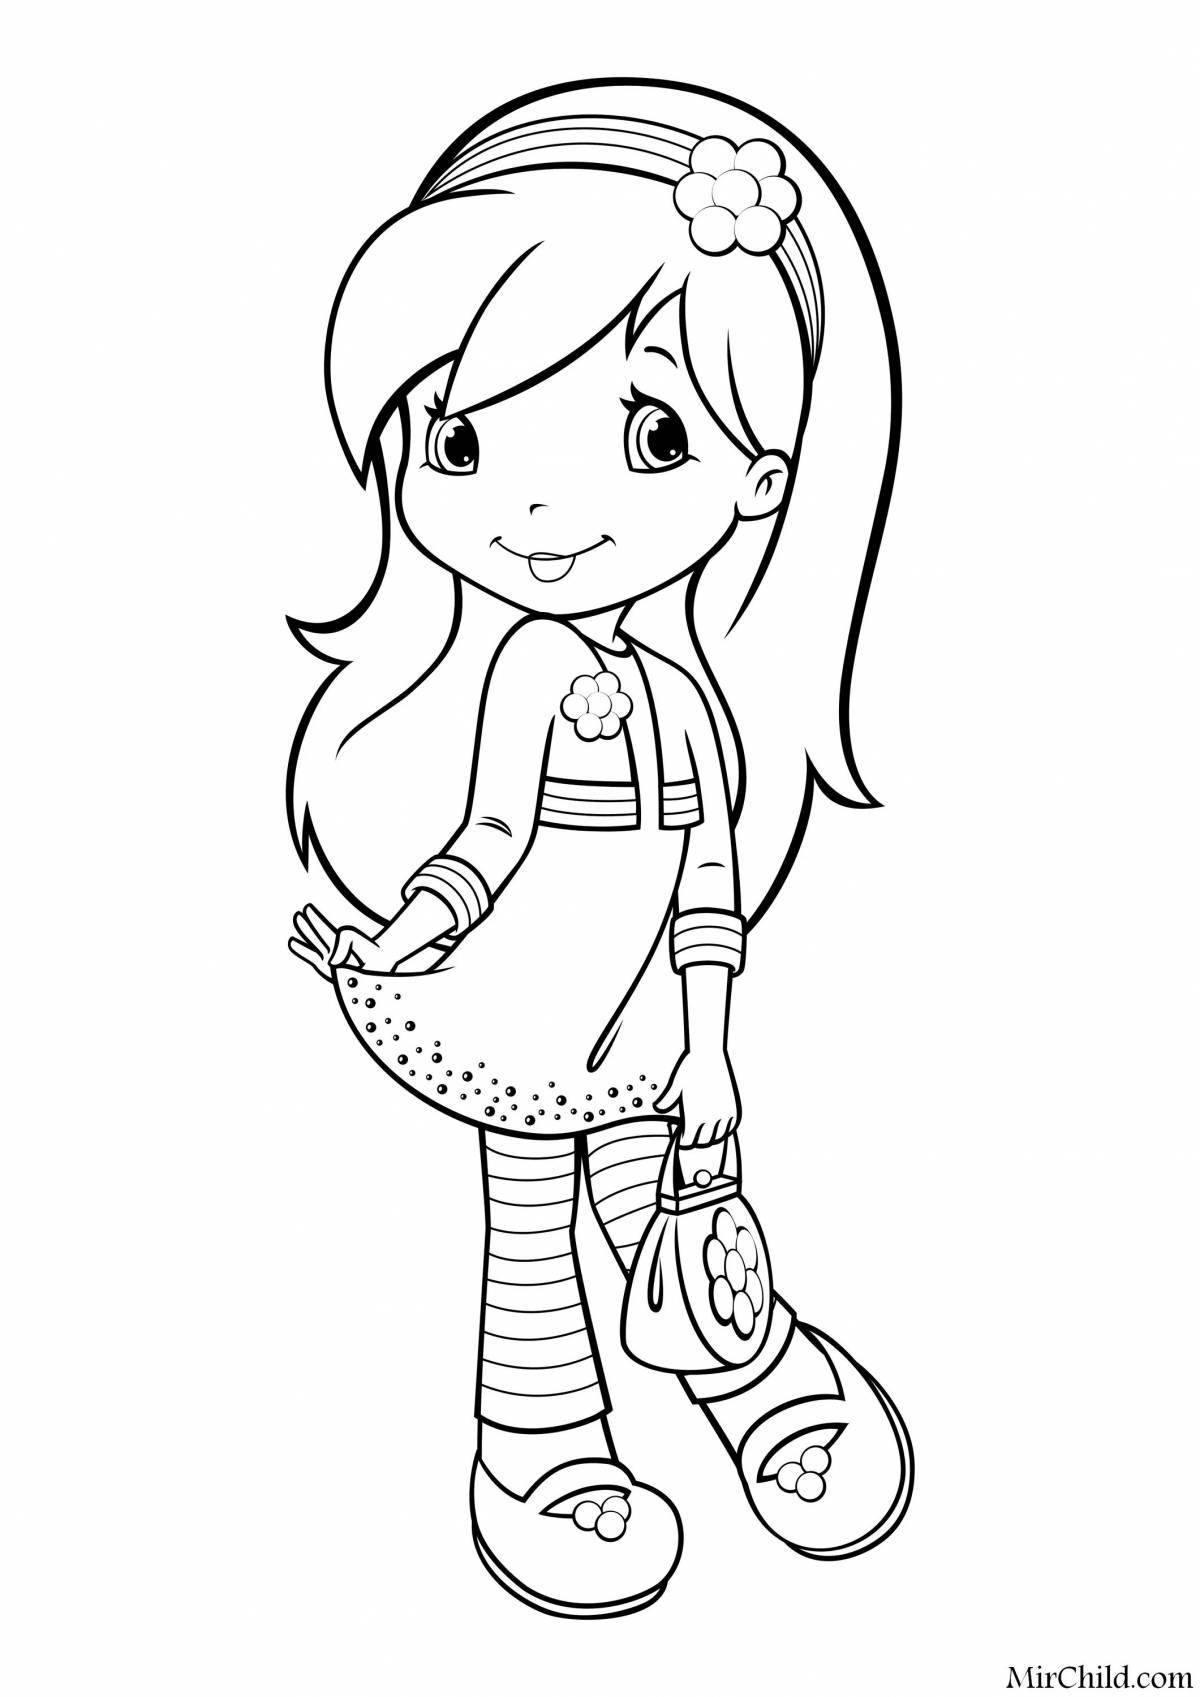 Coloring page dazzling bianca